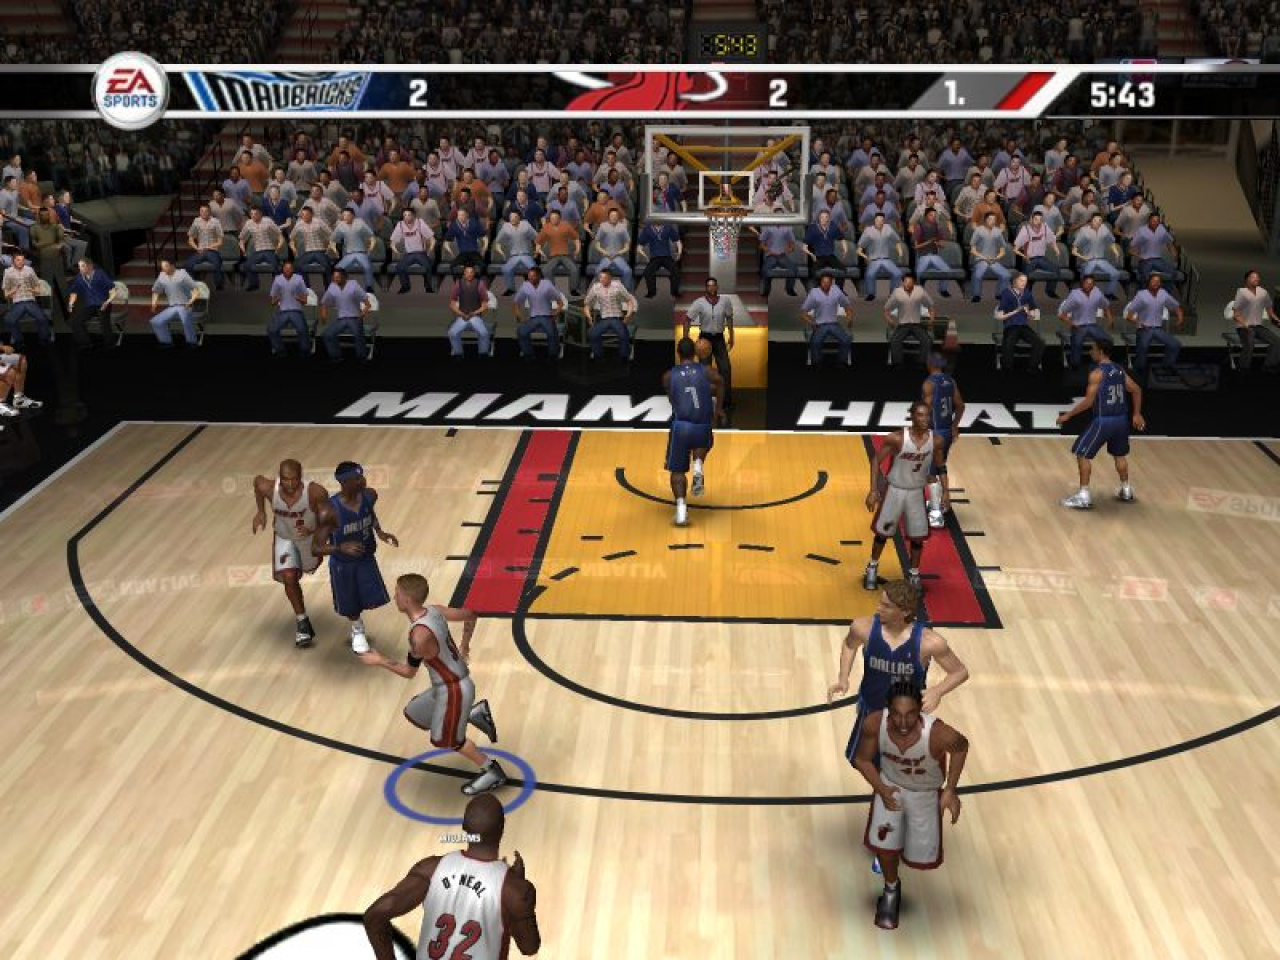 NBA Live 07 Video Game Reviews and Previews PC, PS4, Xbox One and mobile